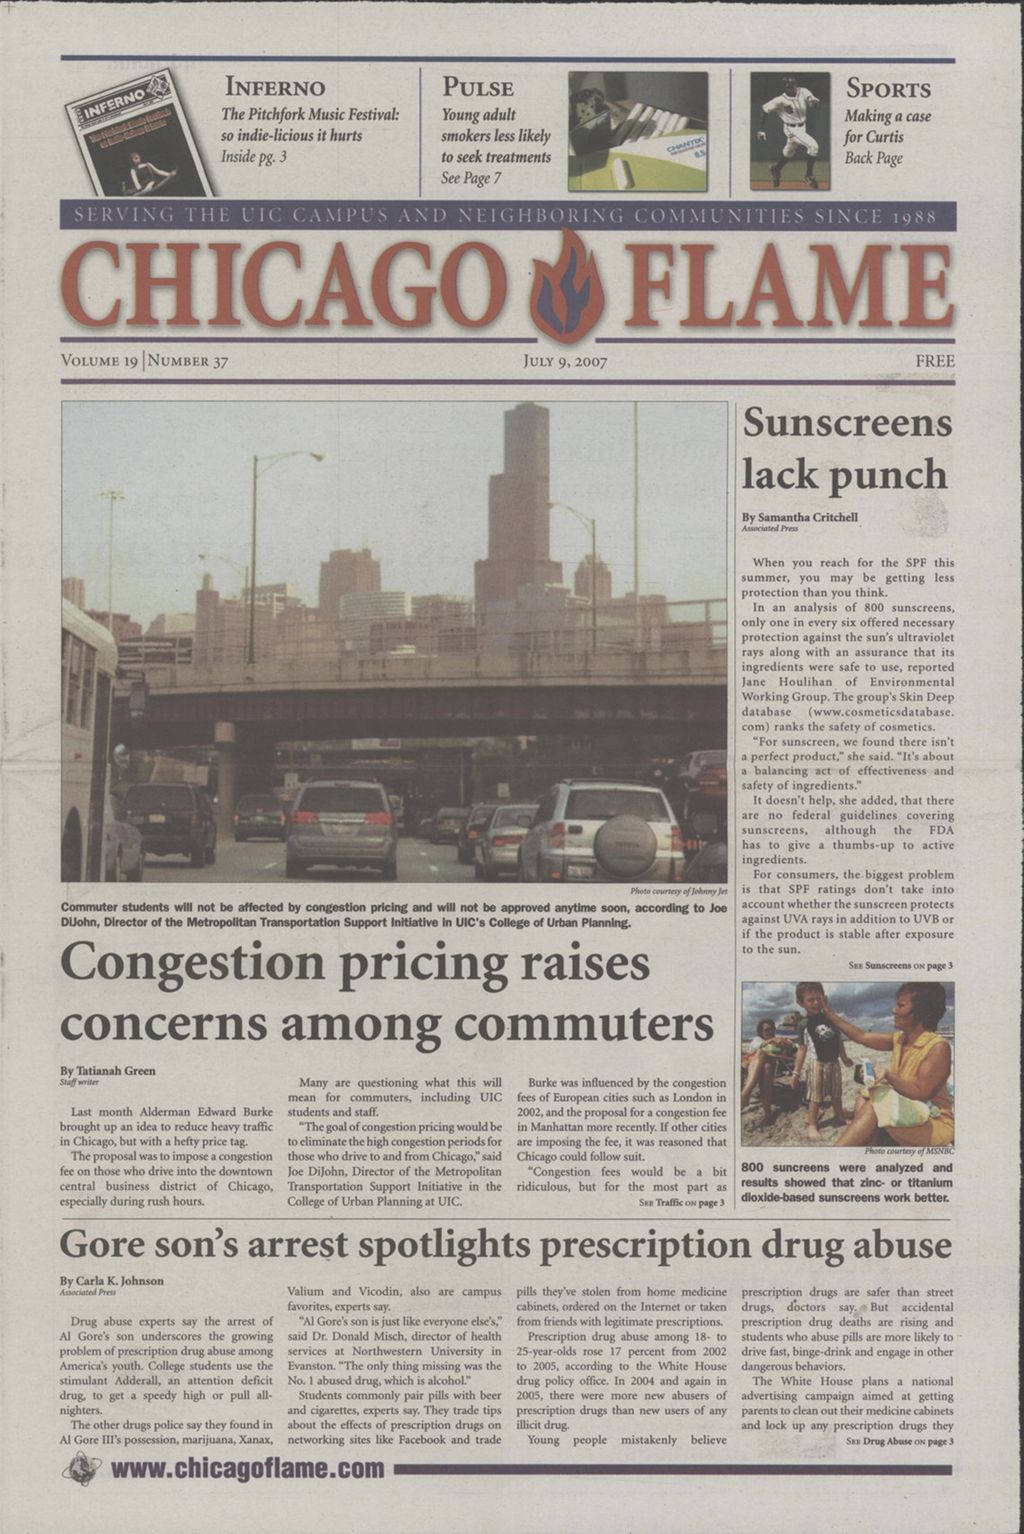 Miniature of Chicago Flame (June 9, 2007)